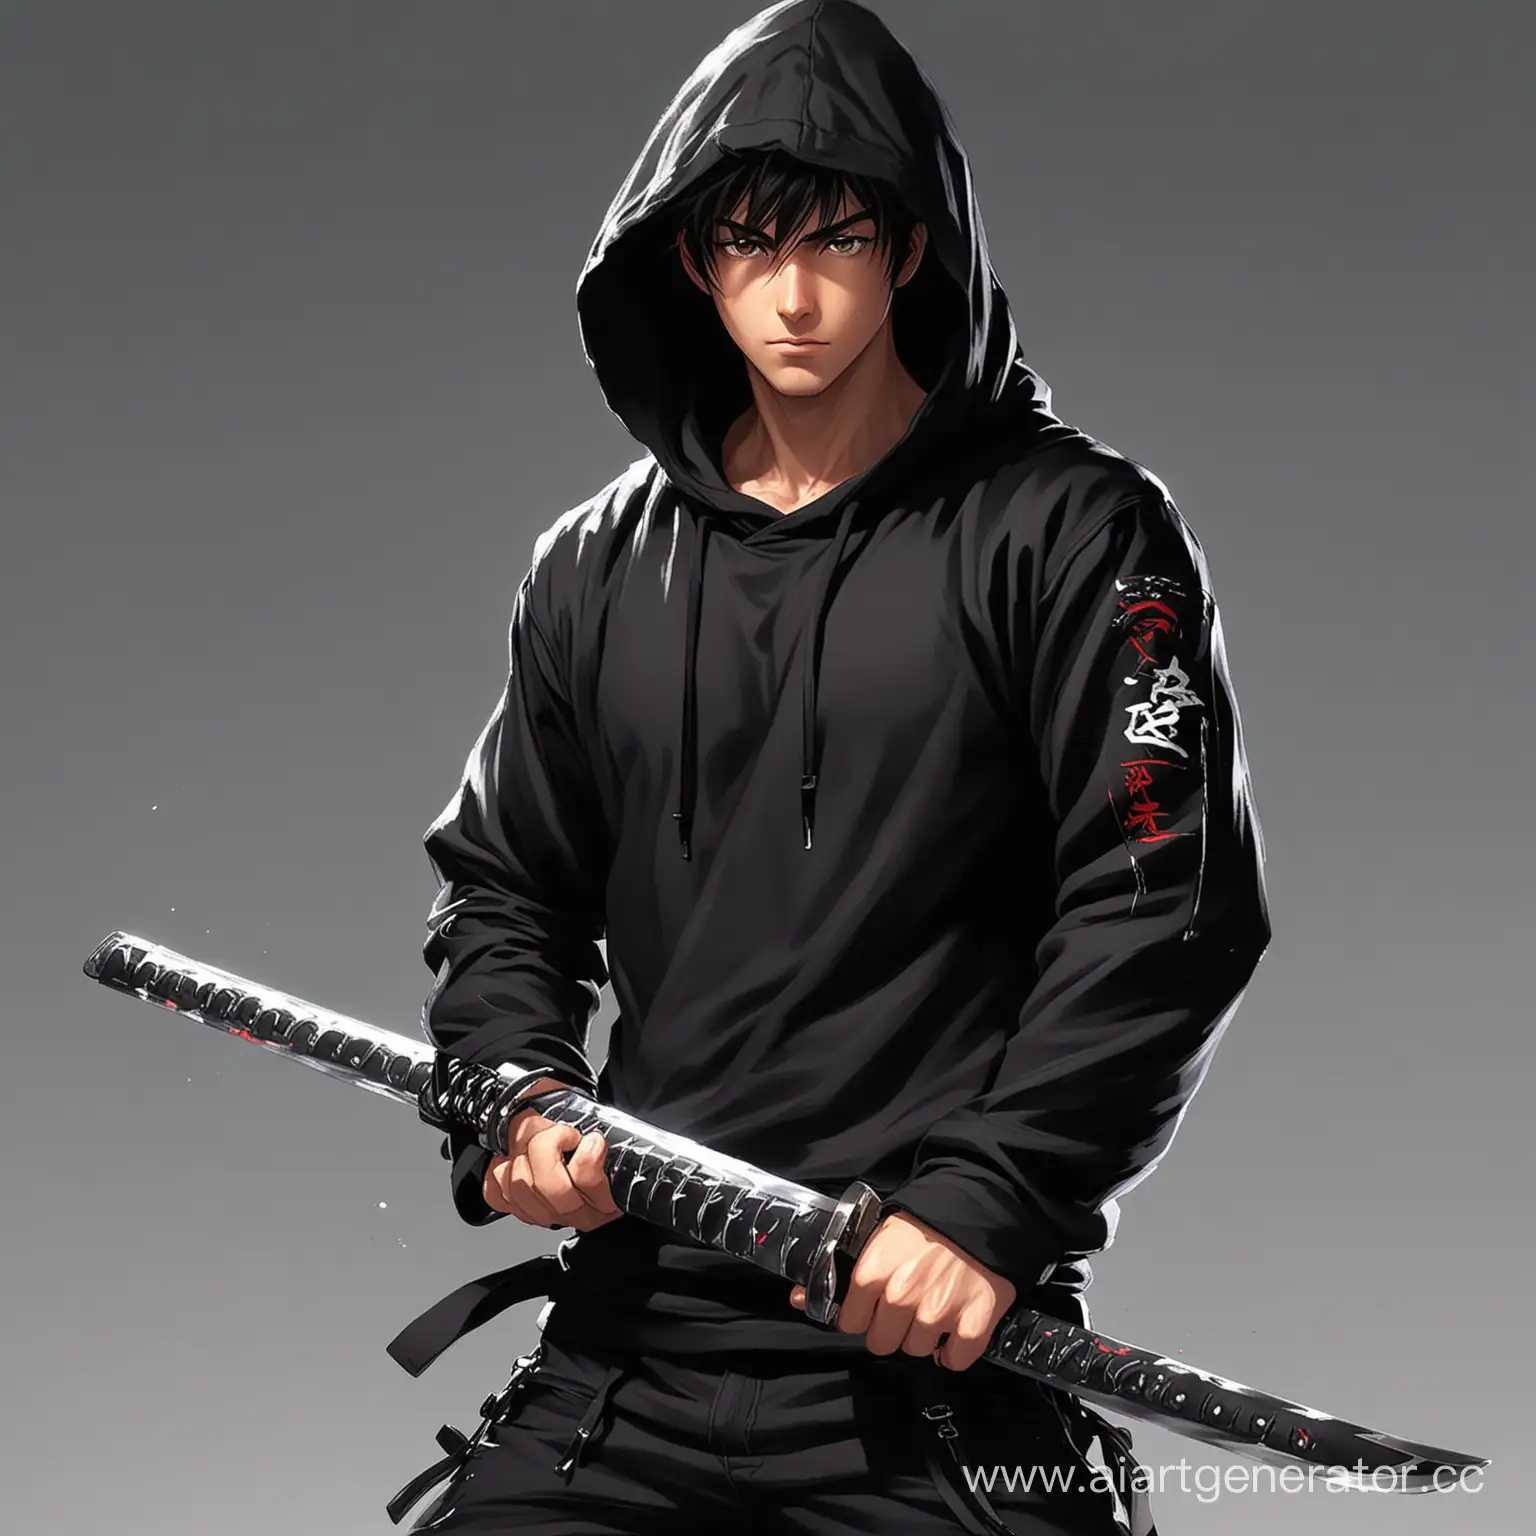 Mysterious-Anime-Character-with-Katana-in-Black-Hoodie